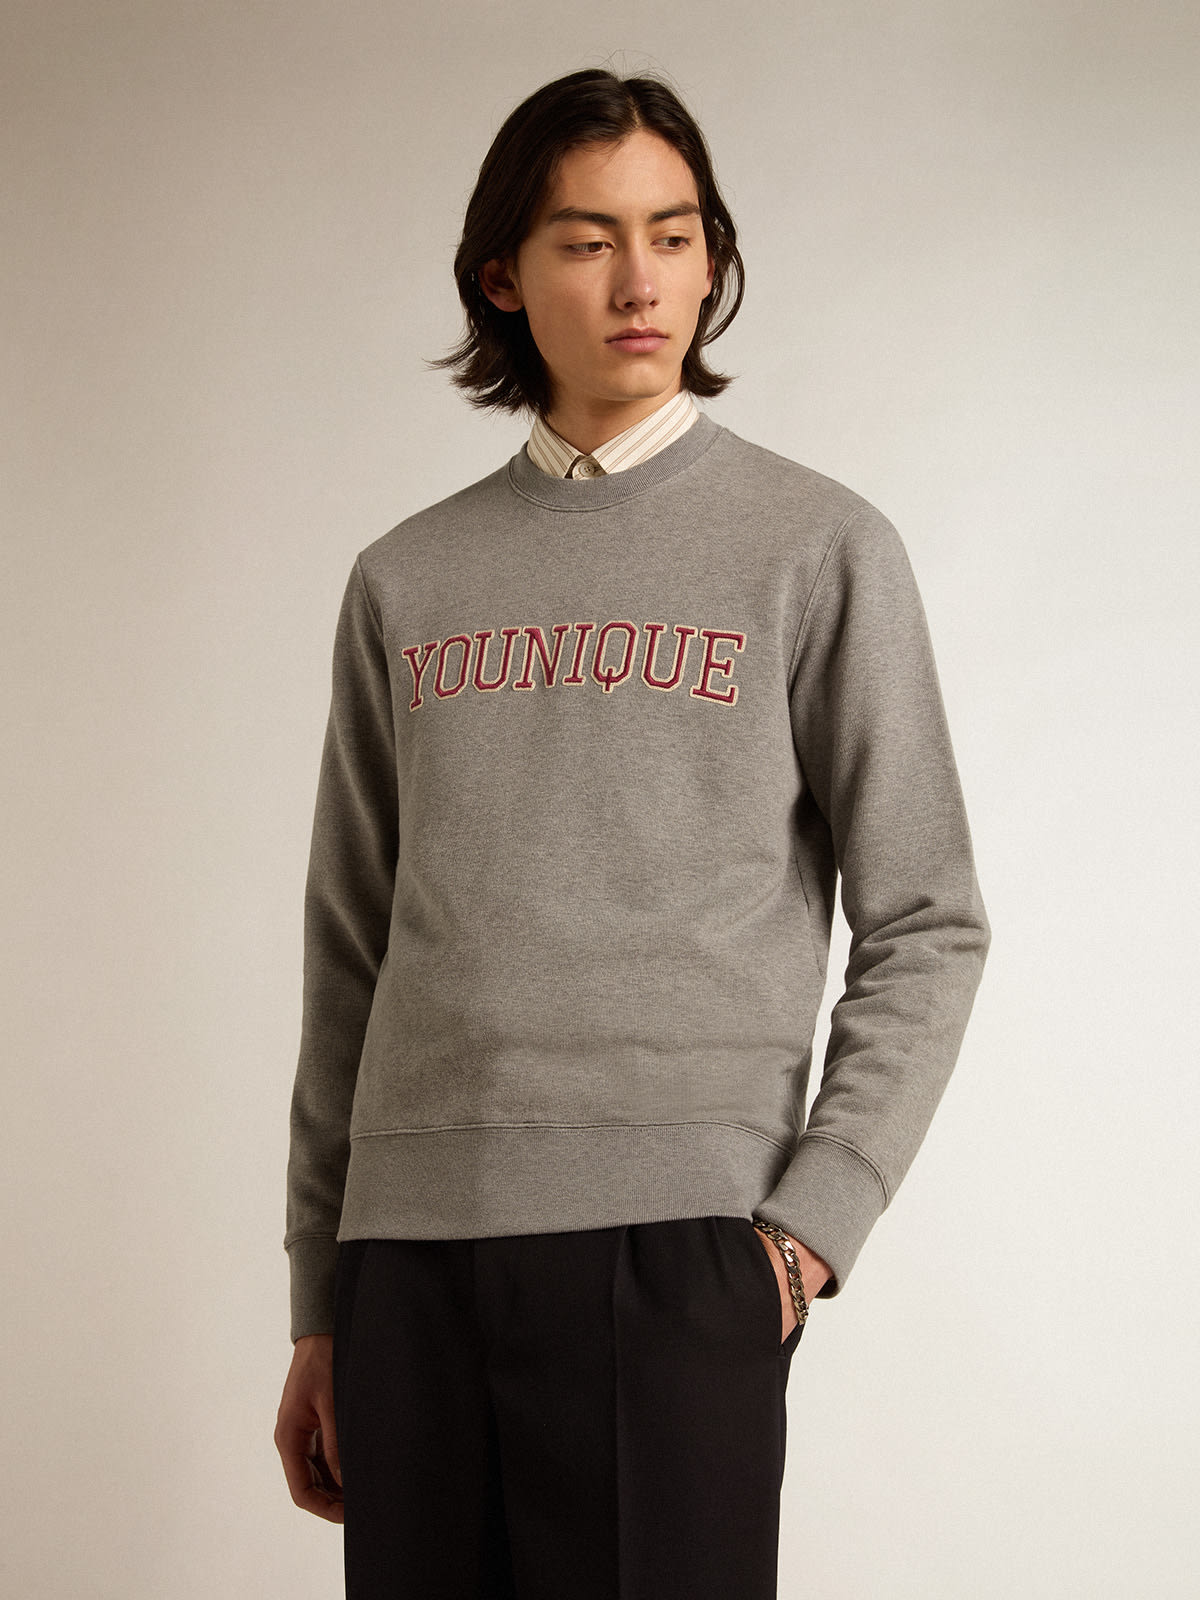 Golden Goose - Gray melange cotton sweatshirt with embroidered lettering in 